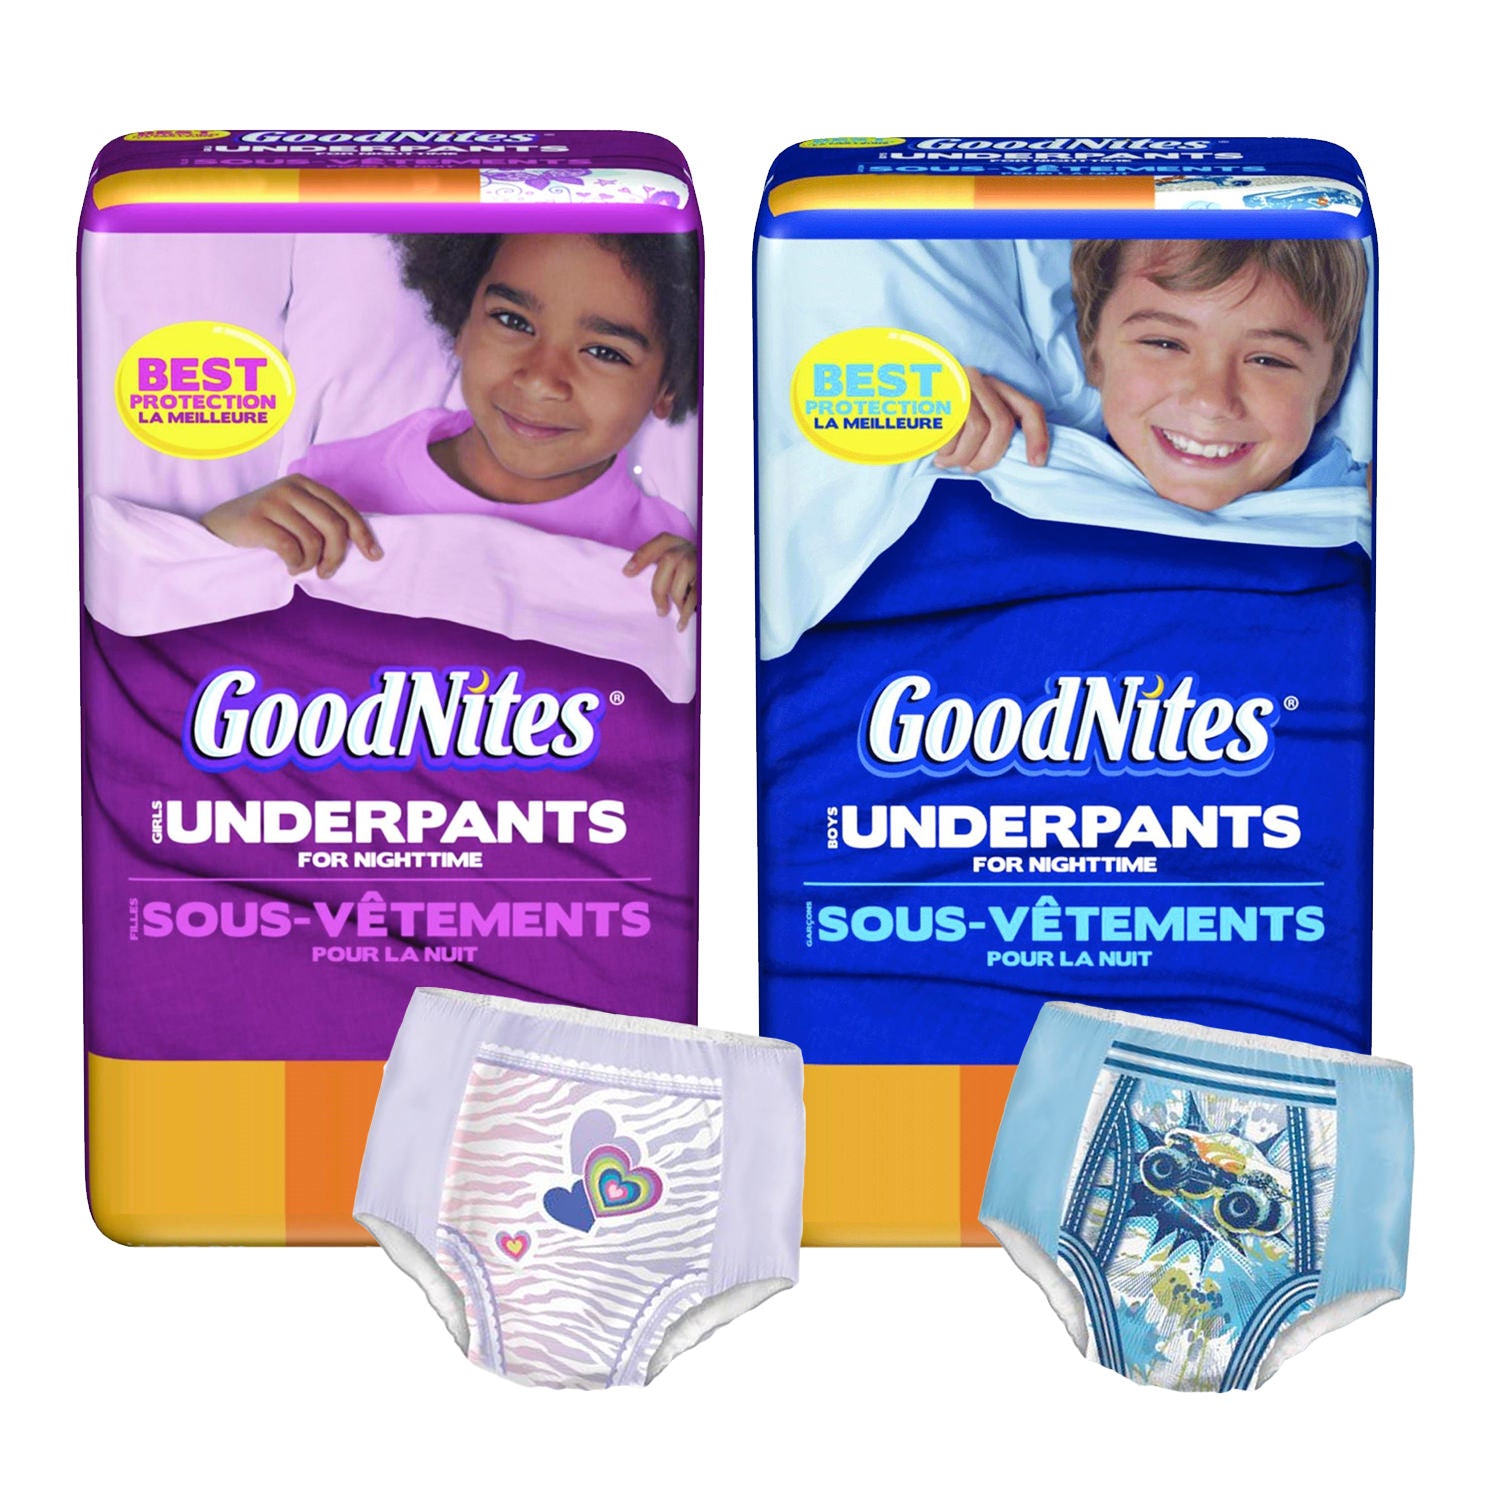 It might be time to switch from diapers to Goodnites®! What other